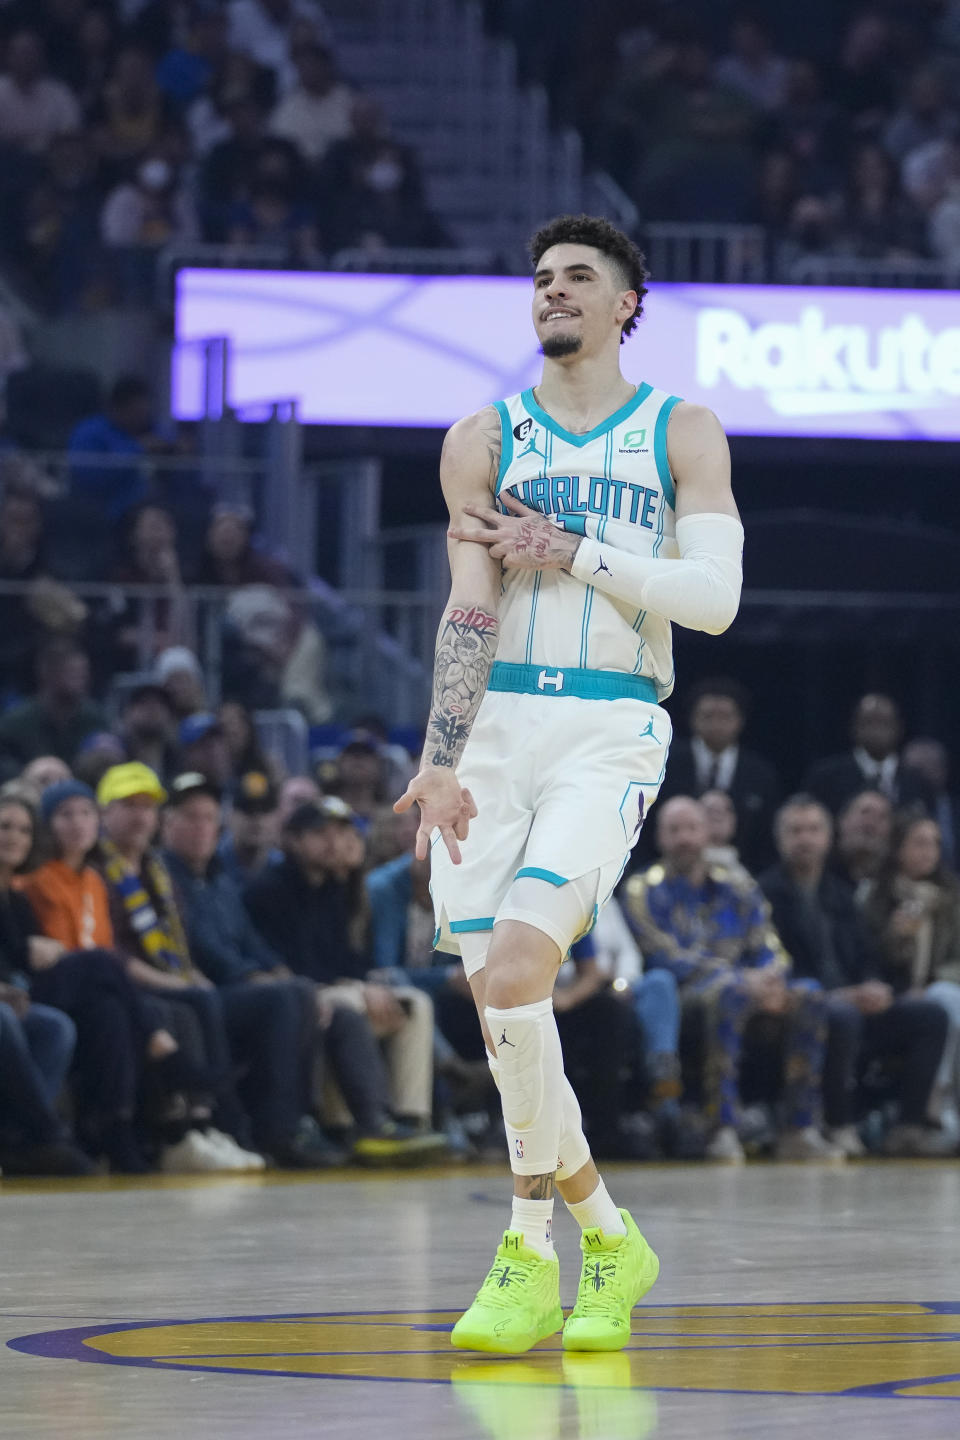 Charlotte Hornets guard LaMelo Ball reacts after scoring a 3-point basket against the Golden State Warriors during the first half of an NBA basketball game in San Francisco, Tuesday, Dec. 27, 2022. (AP Photo/Godofredo A. Vásquez)